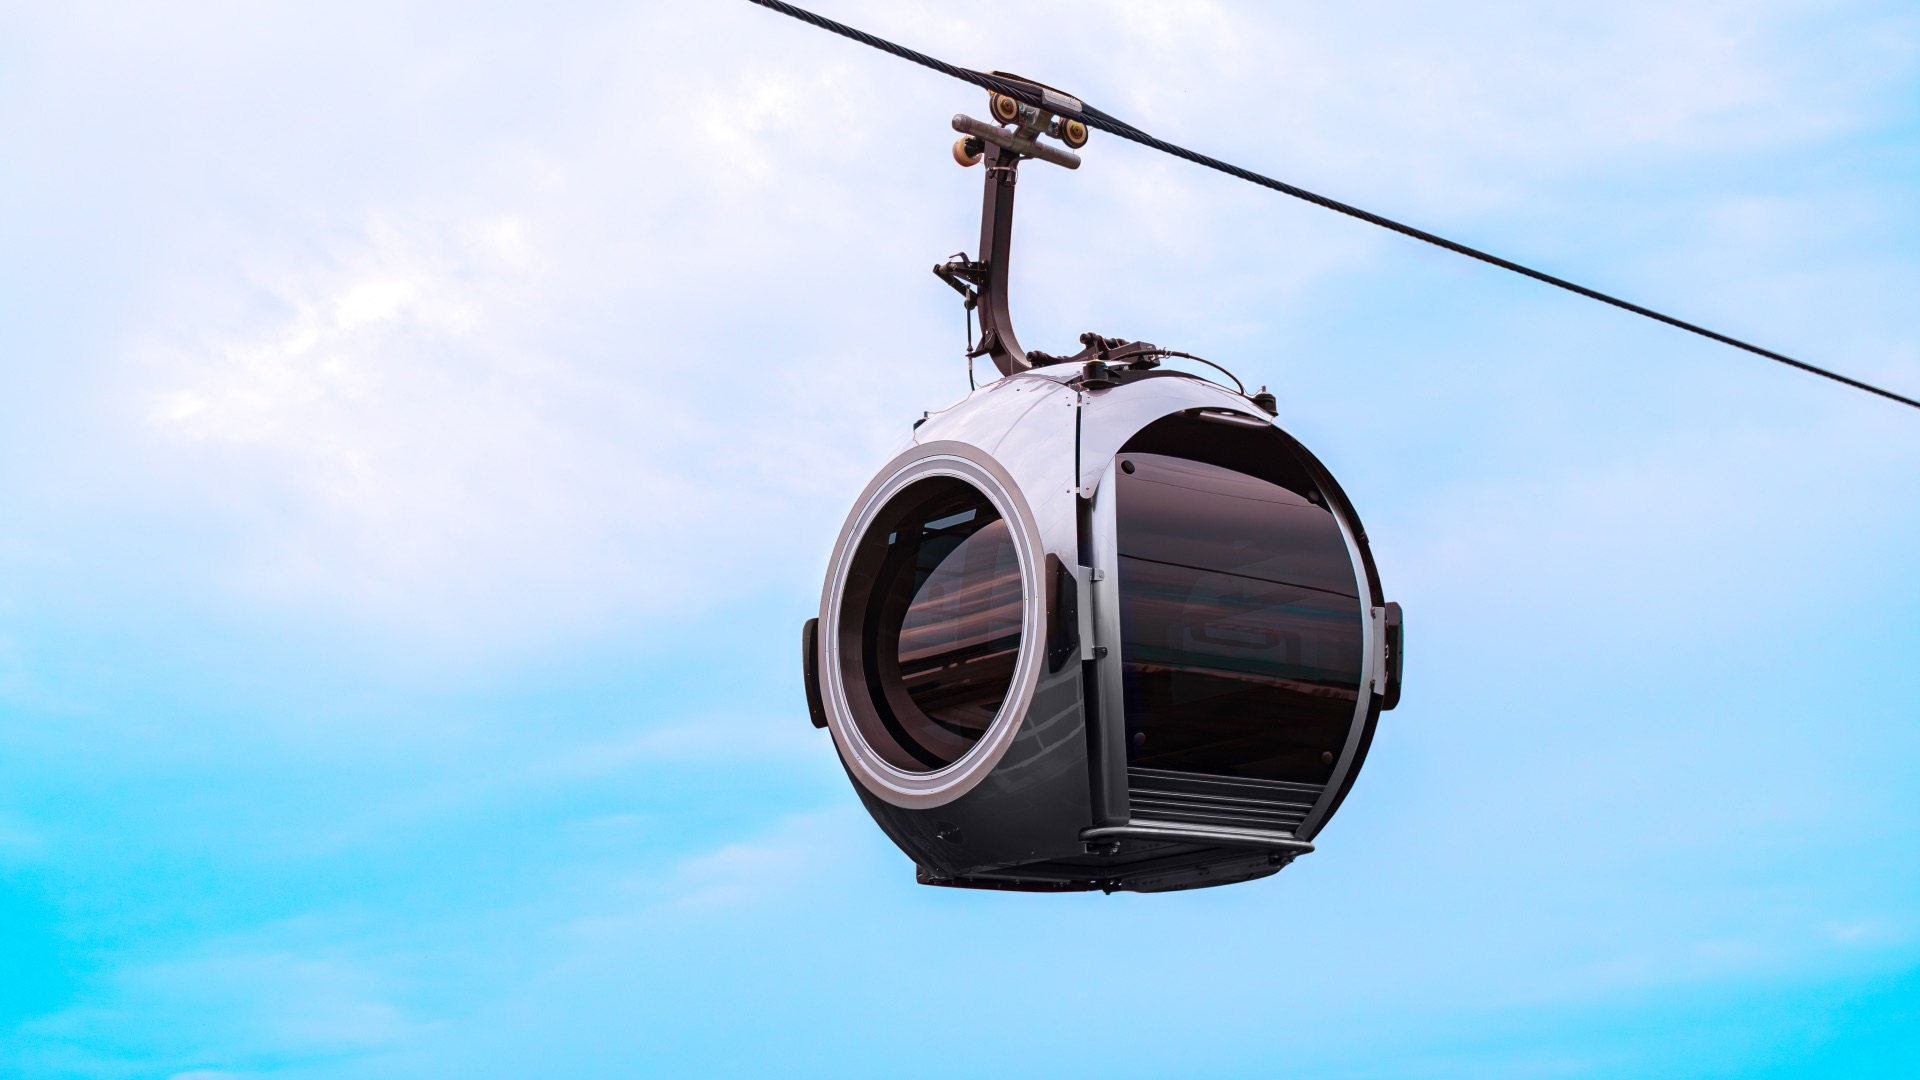 , Singapore Cable Car’s futuristic SkyOrb Cabins have glass-bottomed floors for a spectacular view